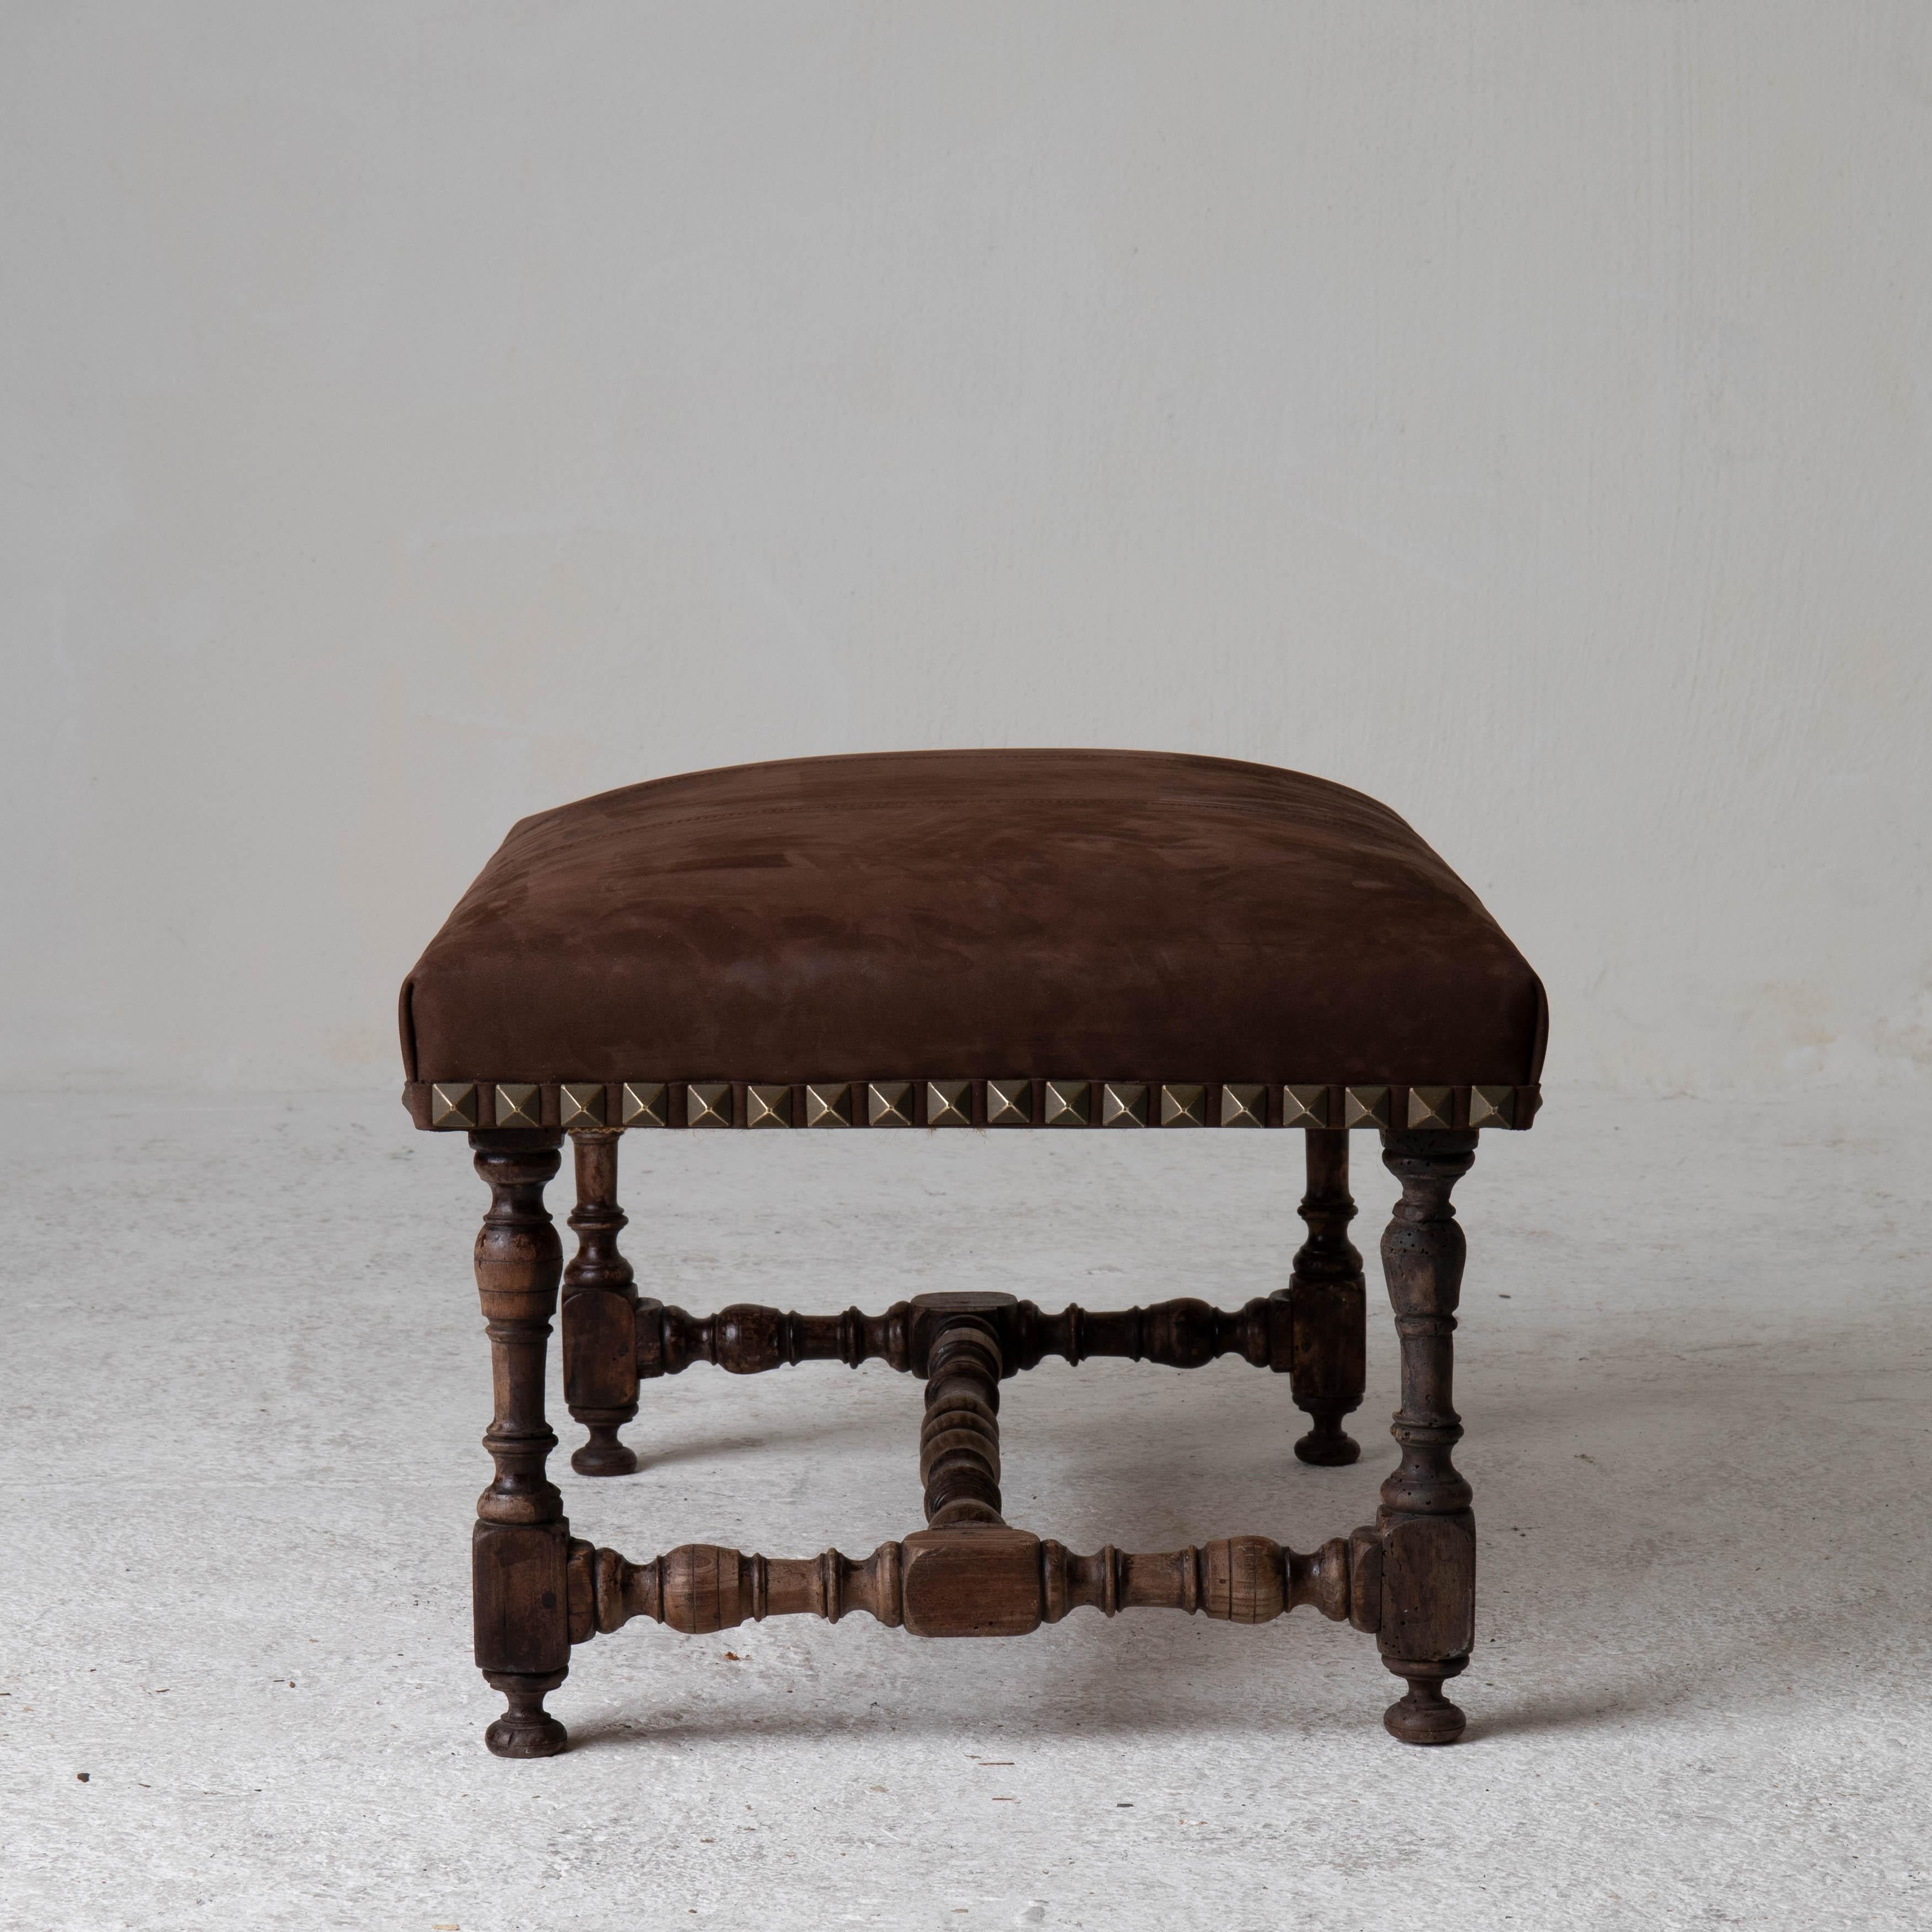 Stools pair European Baroque Period dark brown suede Europe. A pair of rectangular stools made during the Baroque period. Later upholstery and nail head details.

 